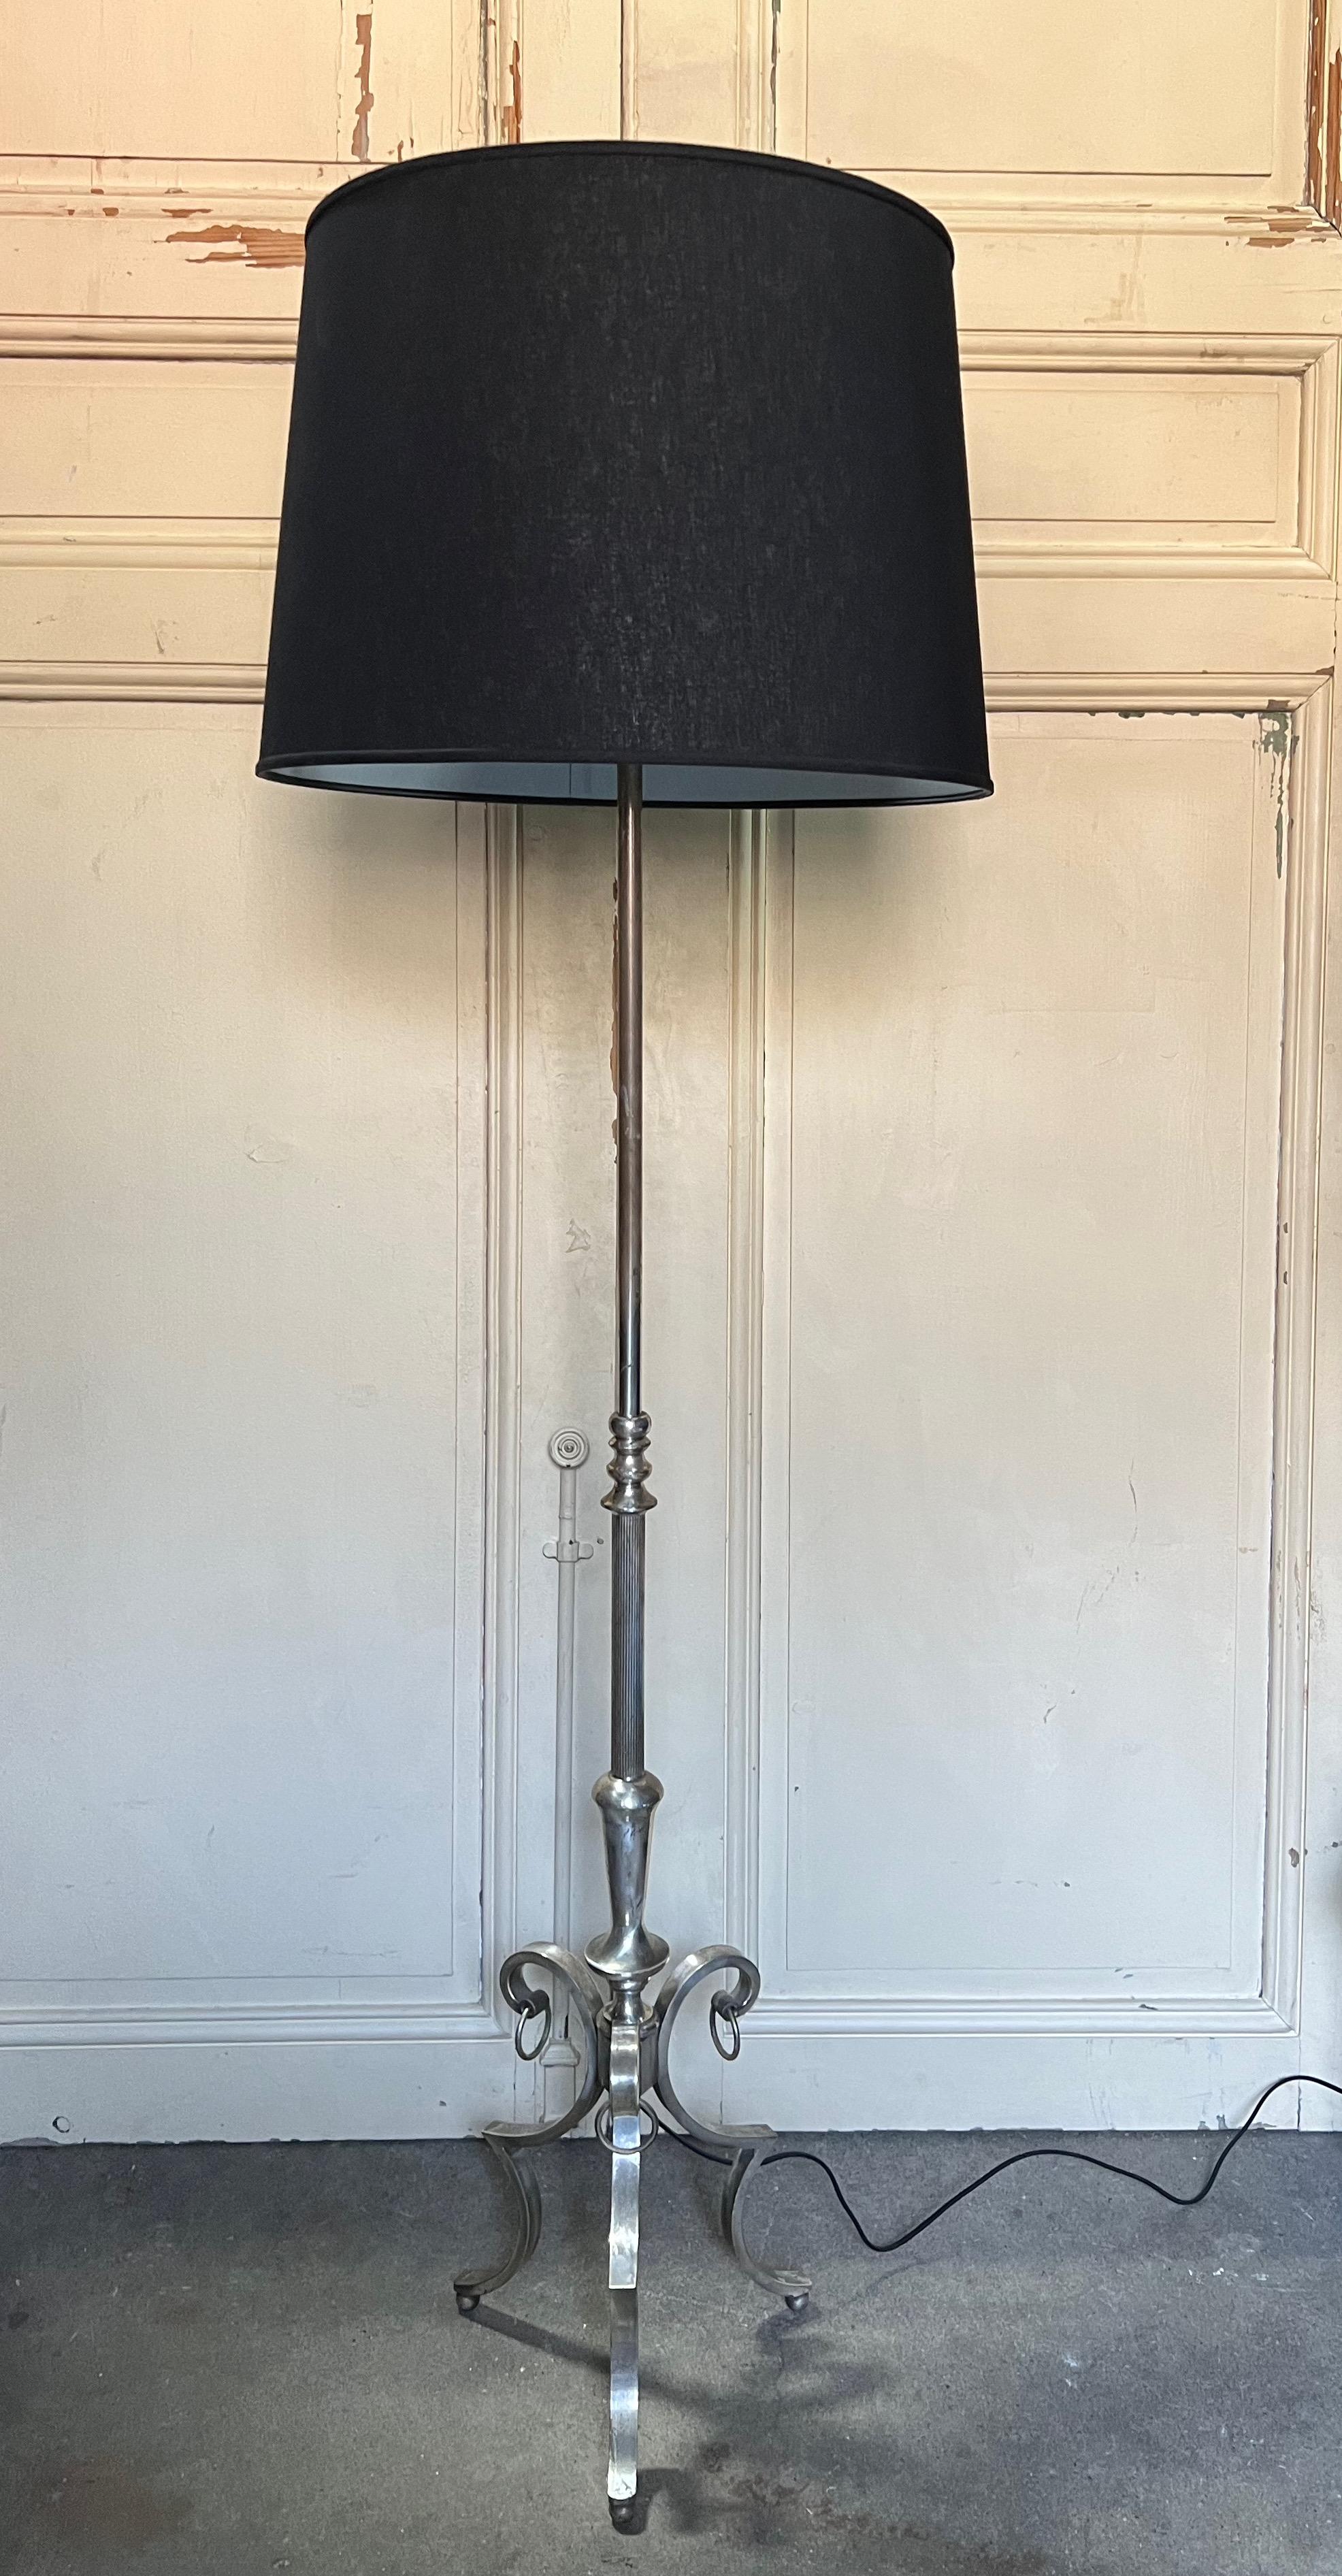 Introducing a sophisticated French 1940s floor lamp with a hand-polished patina that accentuates its vintage allure. The tripod base gracefully rests on ball feet, elegantly complemented by rings that beautifully contour the legs. The stem showcases